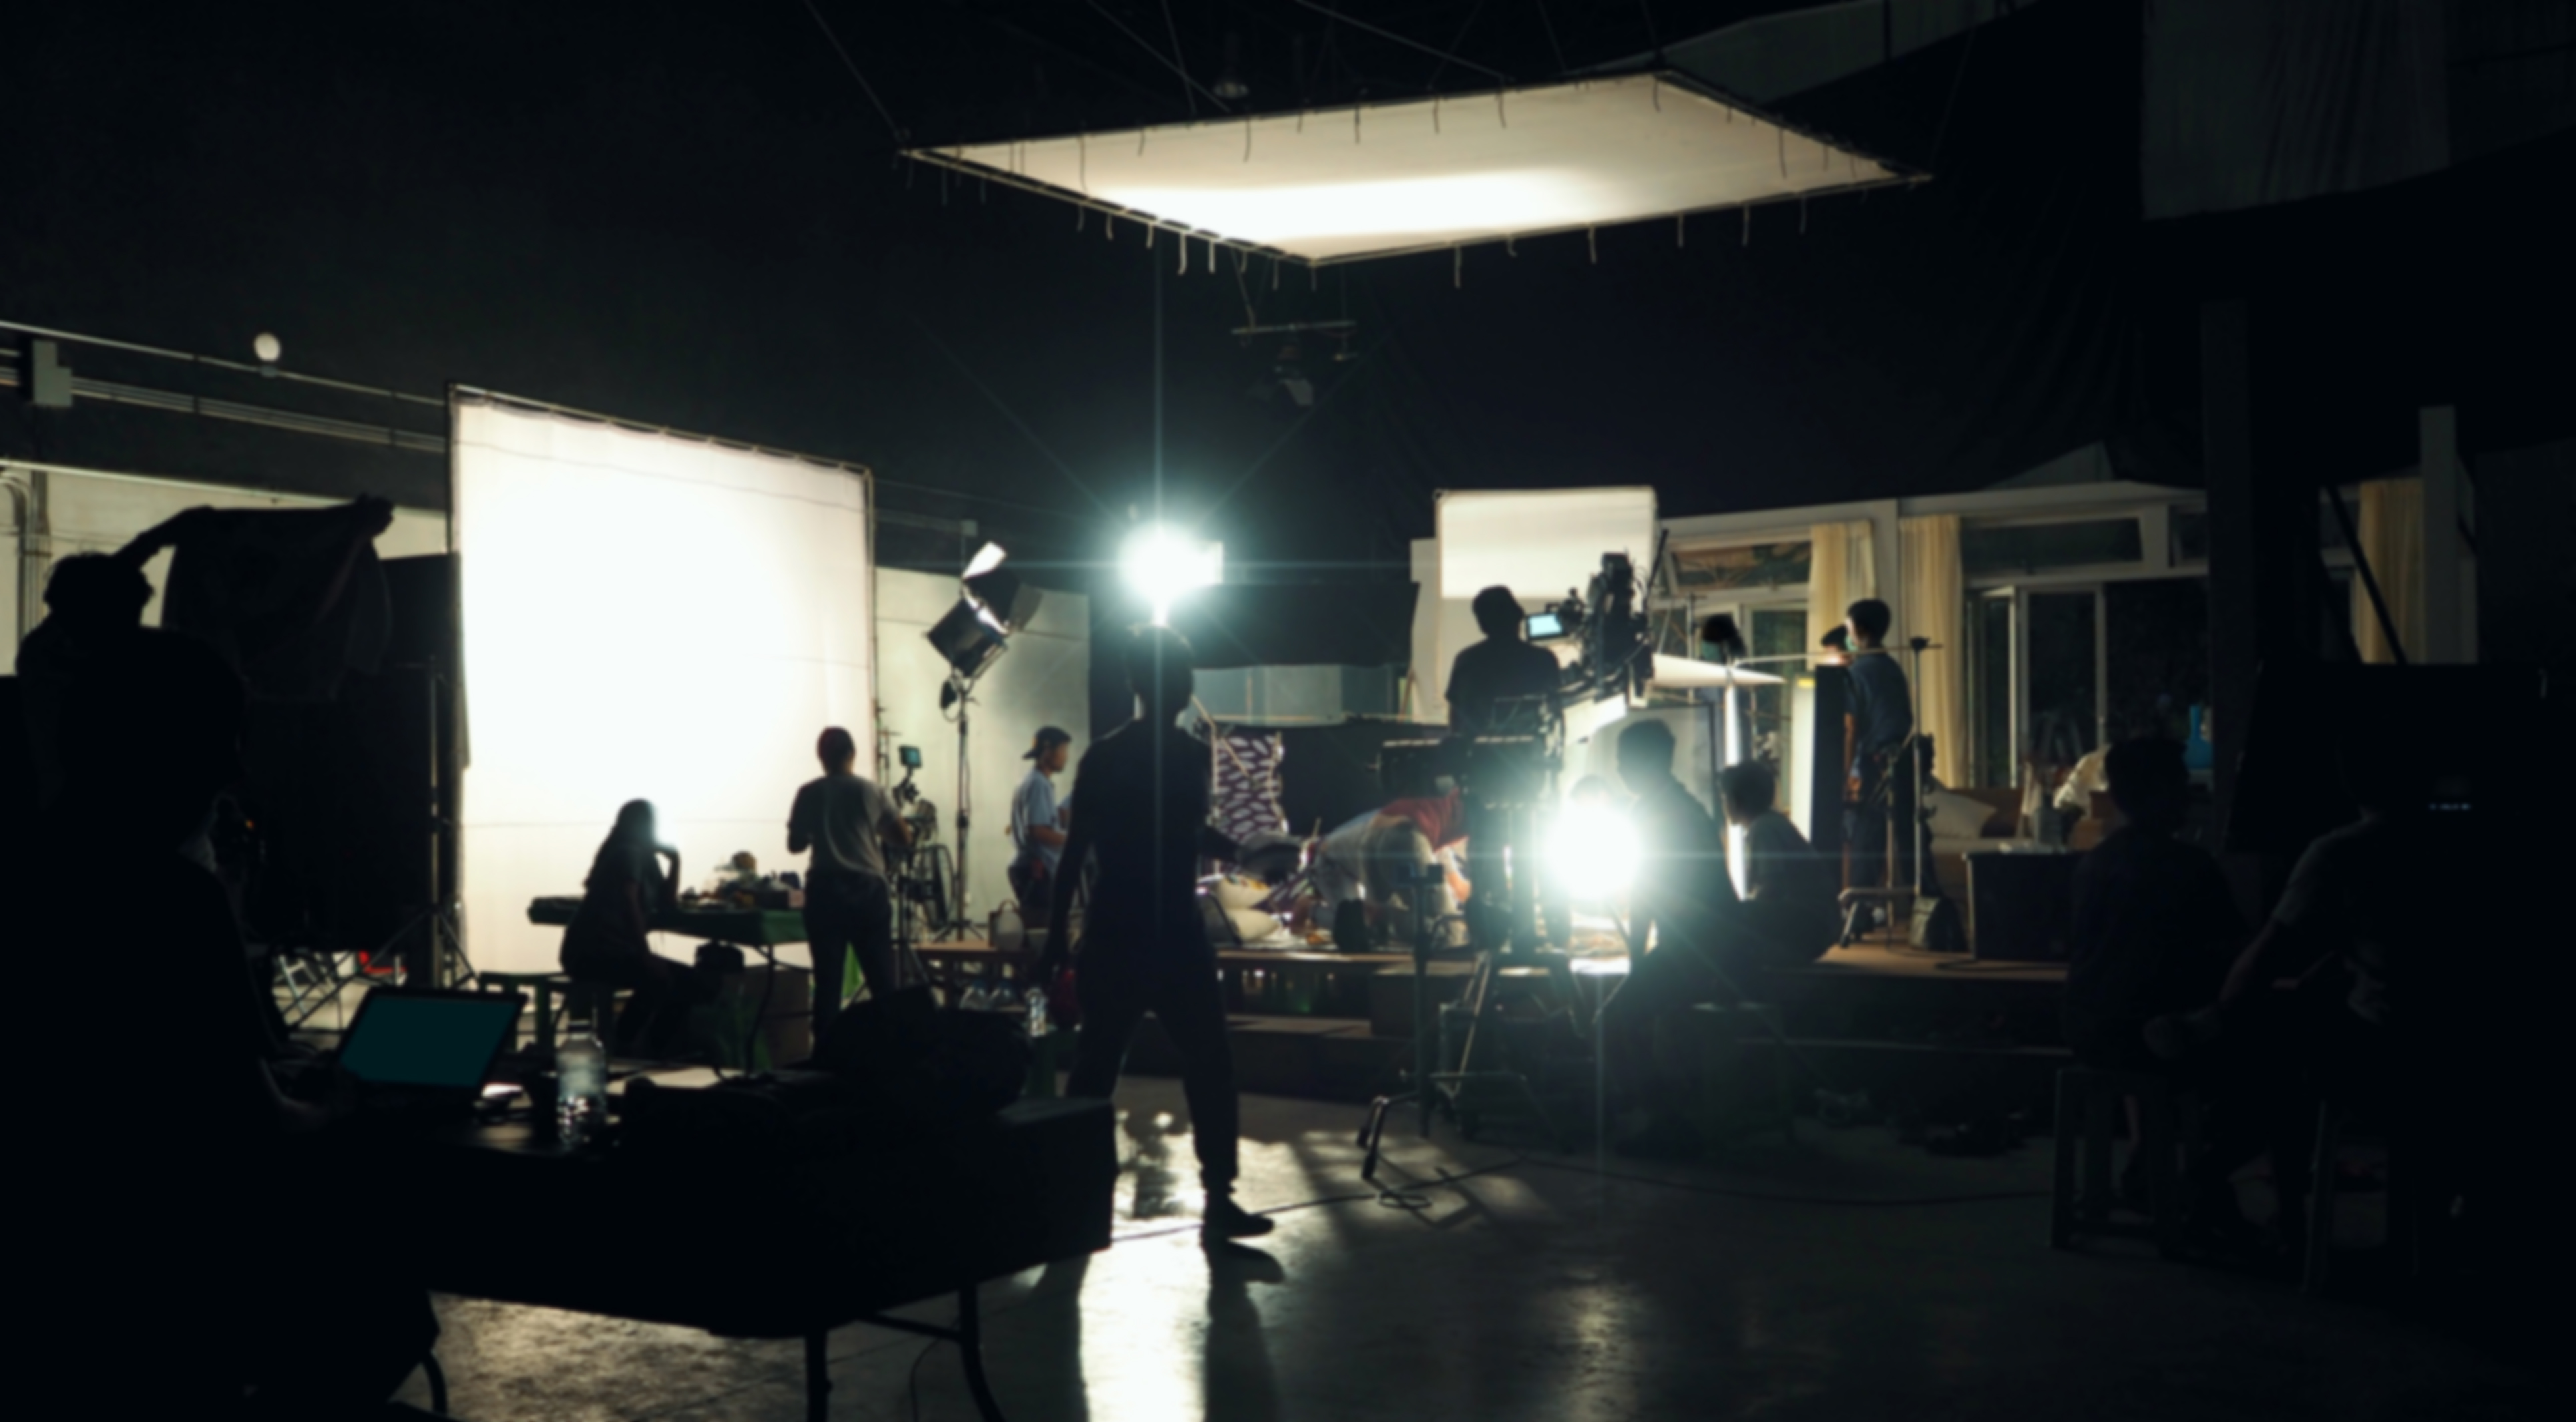 Blurry image of making movie video in big production studio